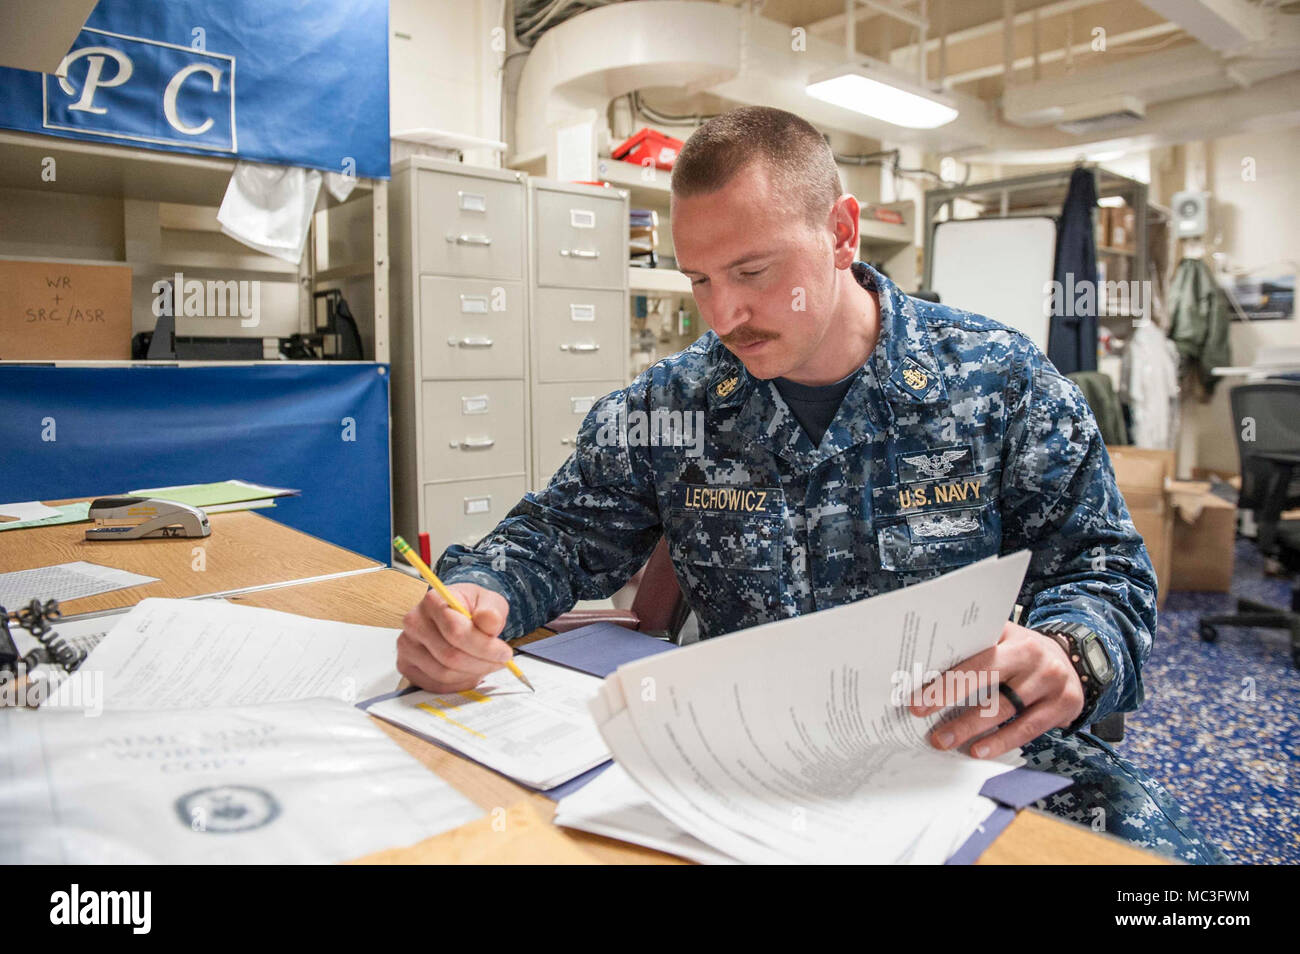 NAVAL BASE SAN DIEGO (April 2, 2018) Chief Aviation Electronics Technician Jason Lechowicz, a native of New Britain, Conn., assigned to the amphibious assault ship USS America (LHA 6), reviews the monthly maintenance plan in the aircraft intermediate maintenance department production control room. America is moored at her homeport of Naval Base San Diego and is beginning a planned maintenance availability period in preparation for her next tour of duty. Stock Photo